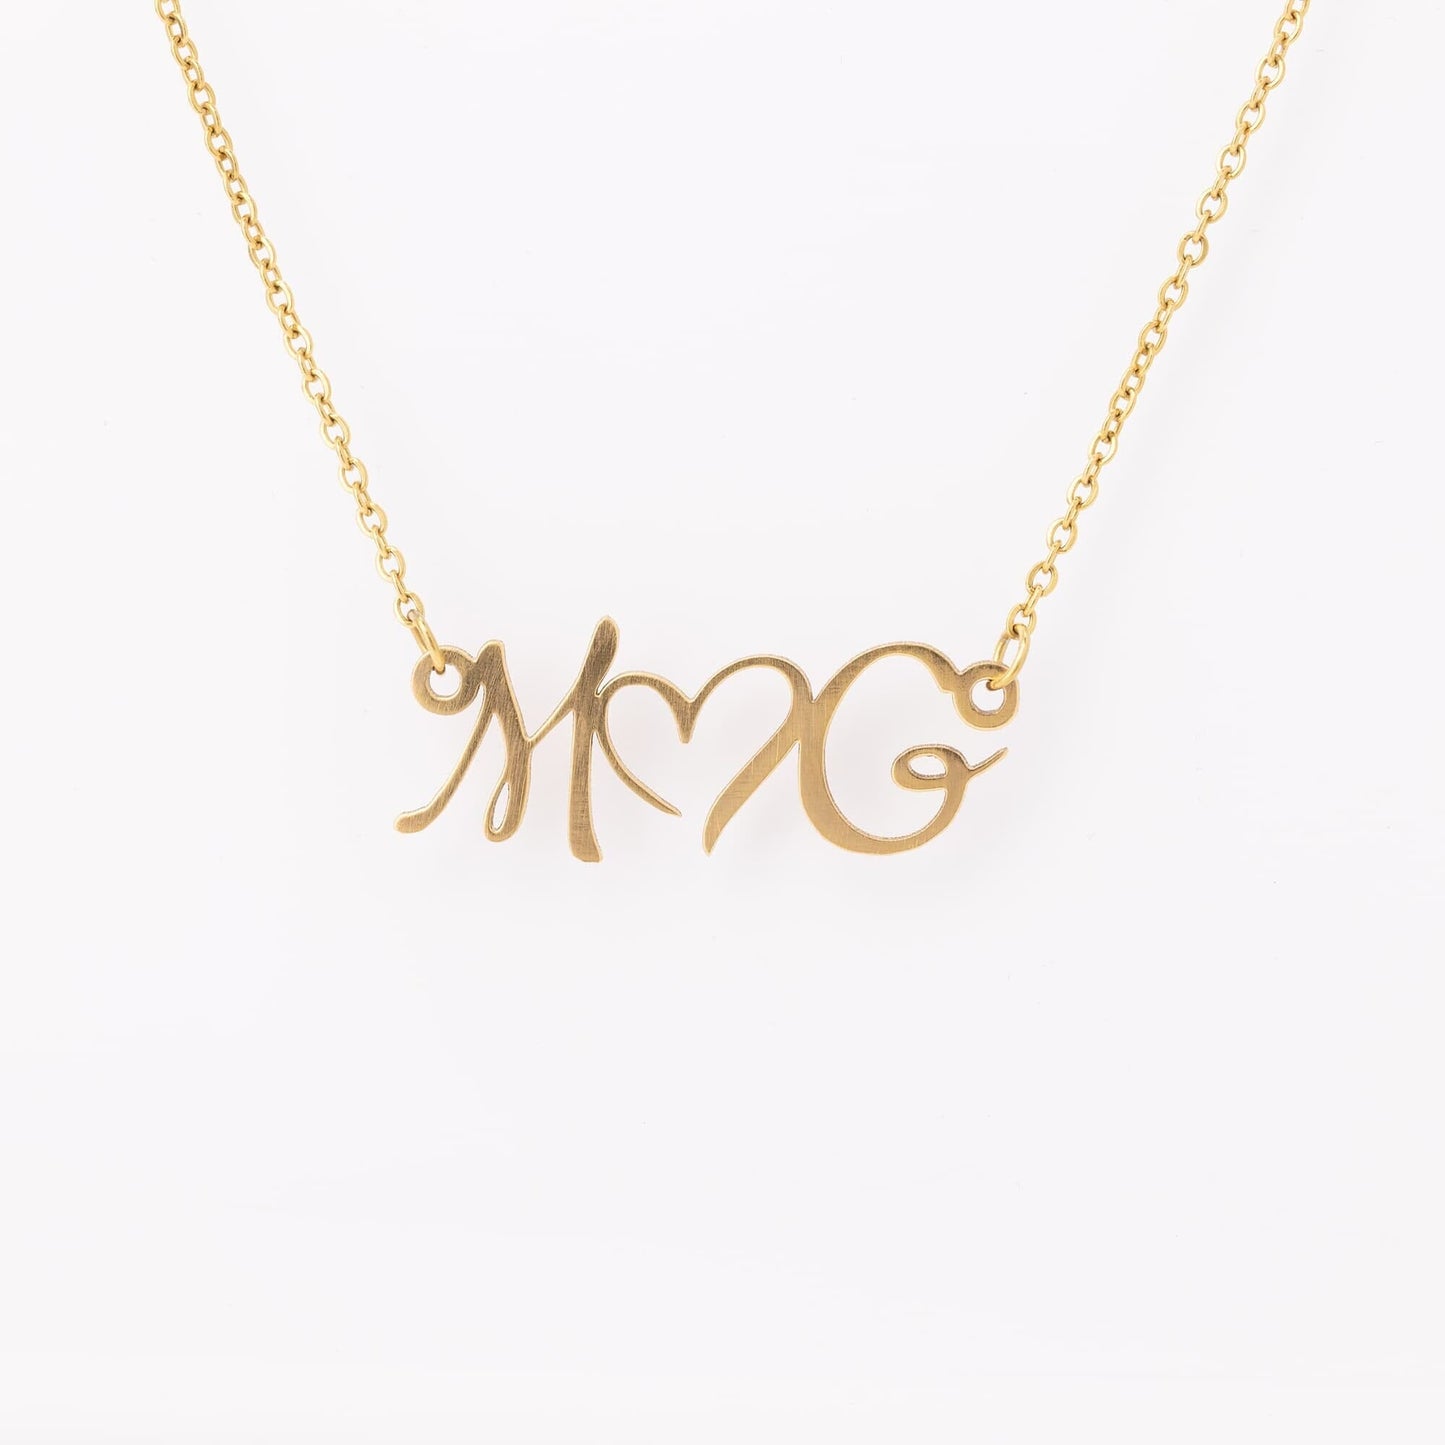 Personalized Heart Necklace With Initials - HGF#227HI Jewelry Gold 